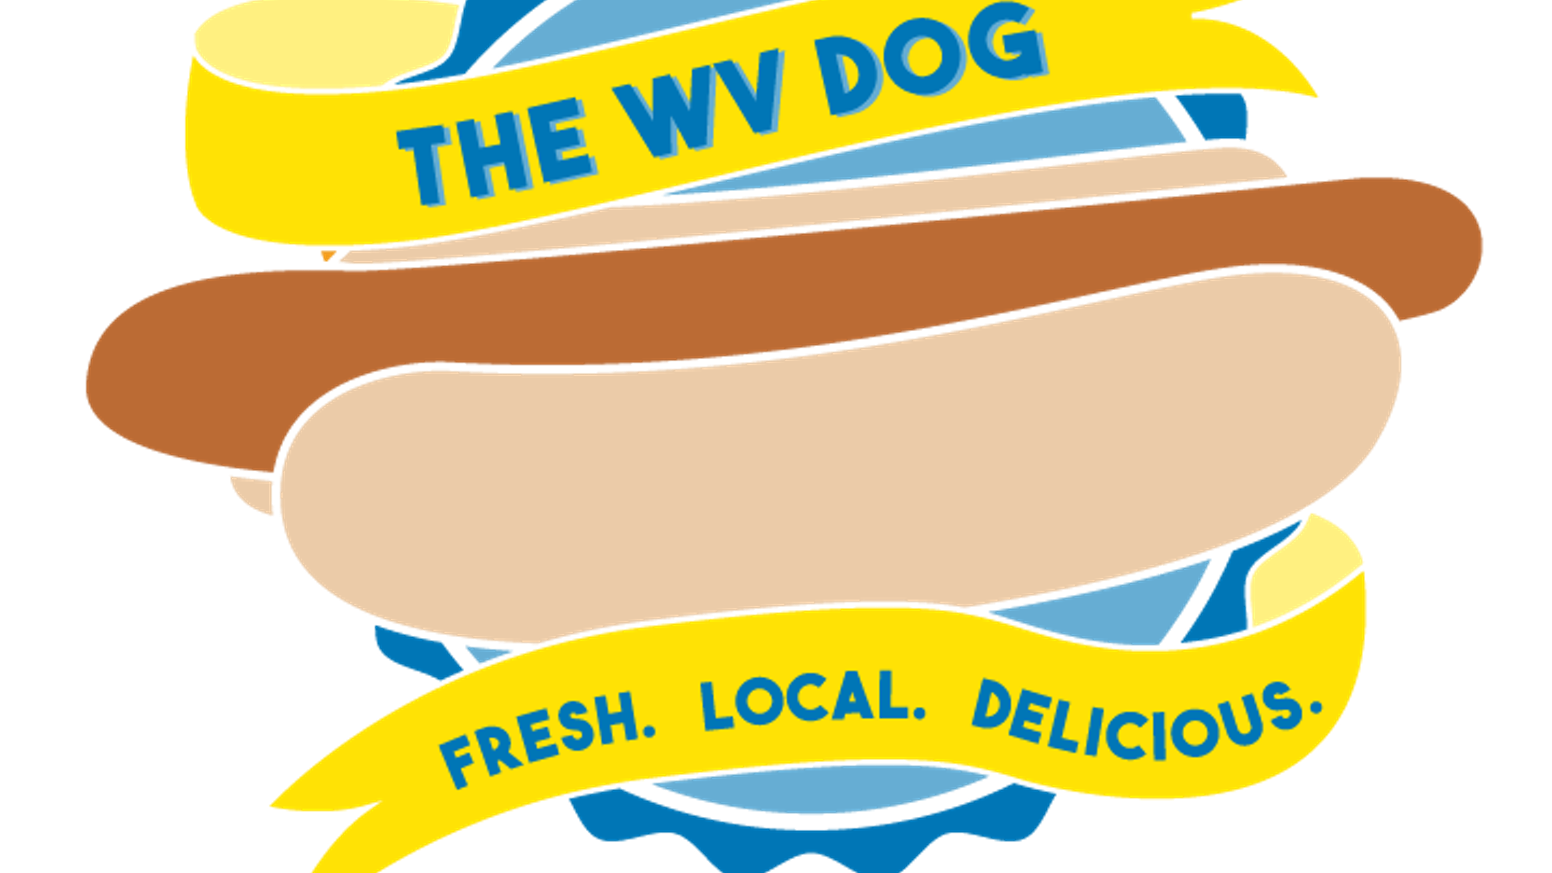 Clipart pig meal. Hotdogs a west virginia